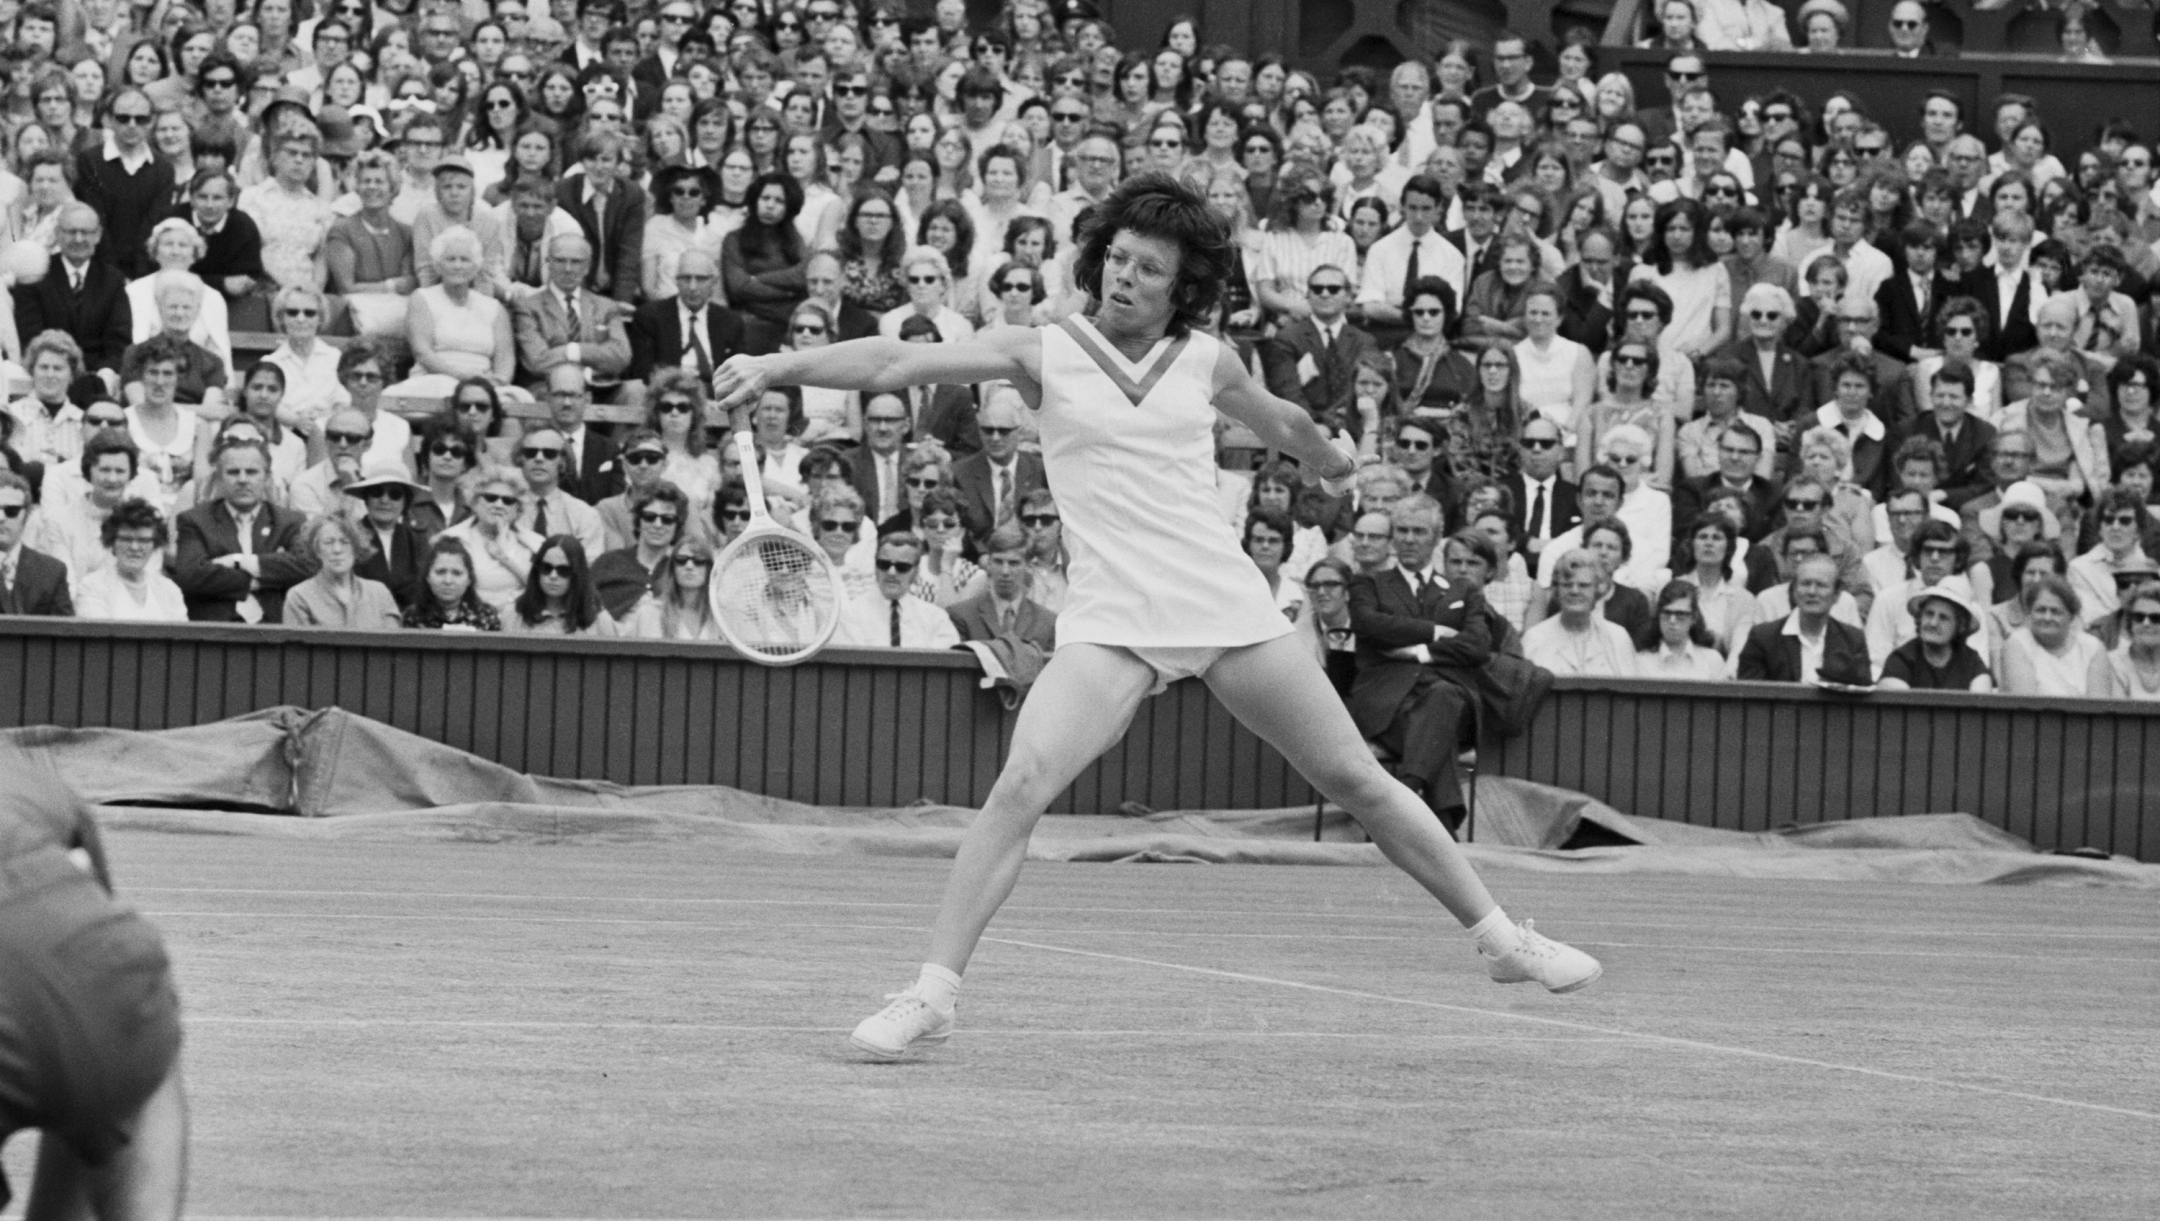 American tennis player Billie Jean King on the court at Wimbledon, 28th June 1971.  (Photo by Harry Dempster/Daily Express/Getty Images)